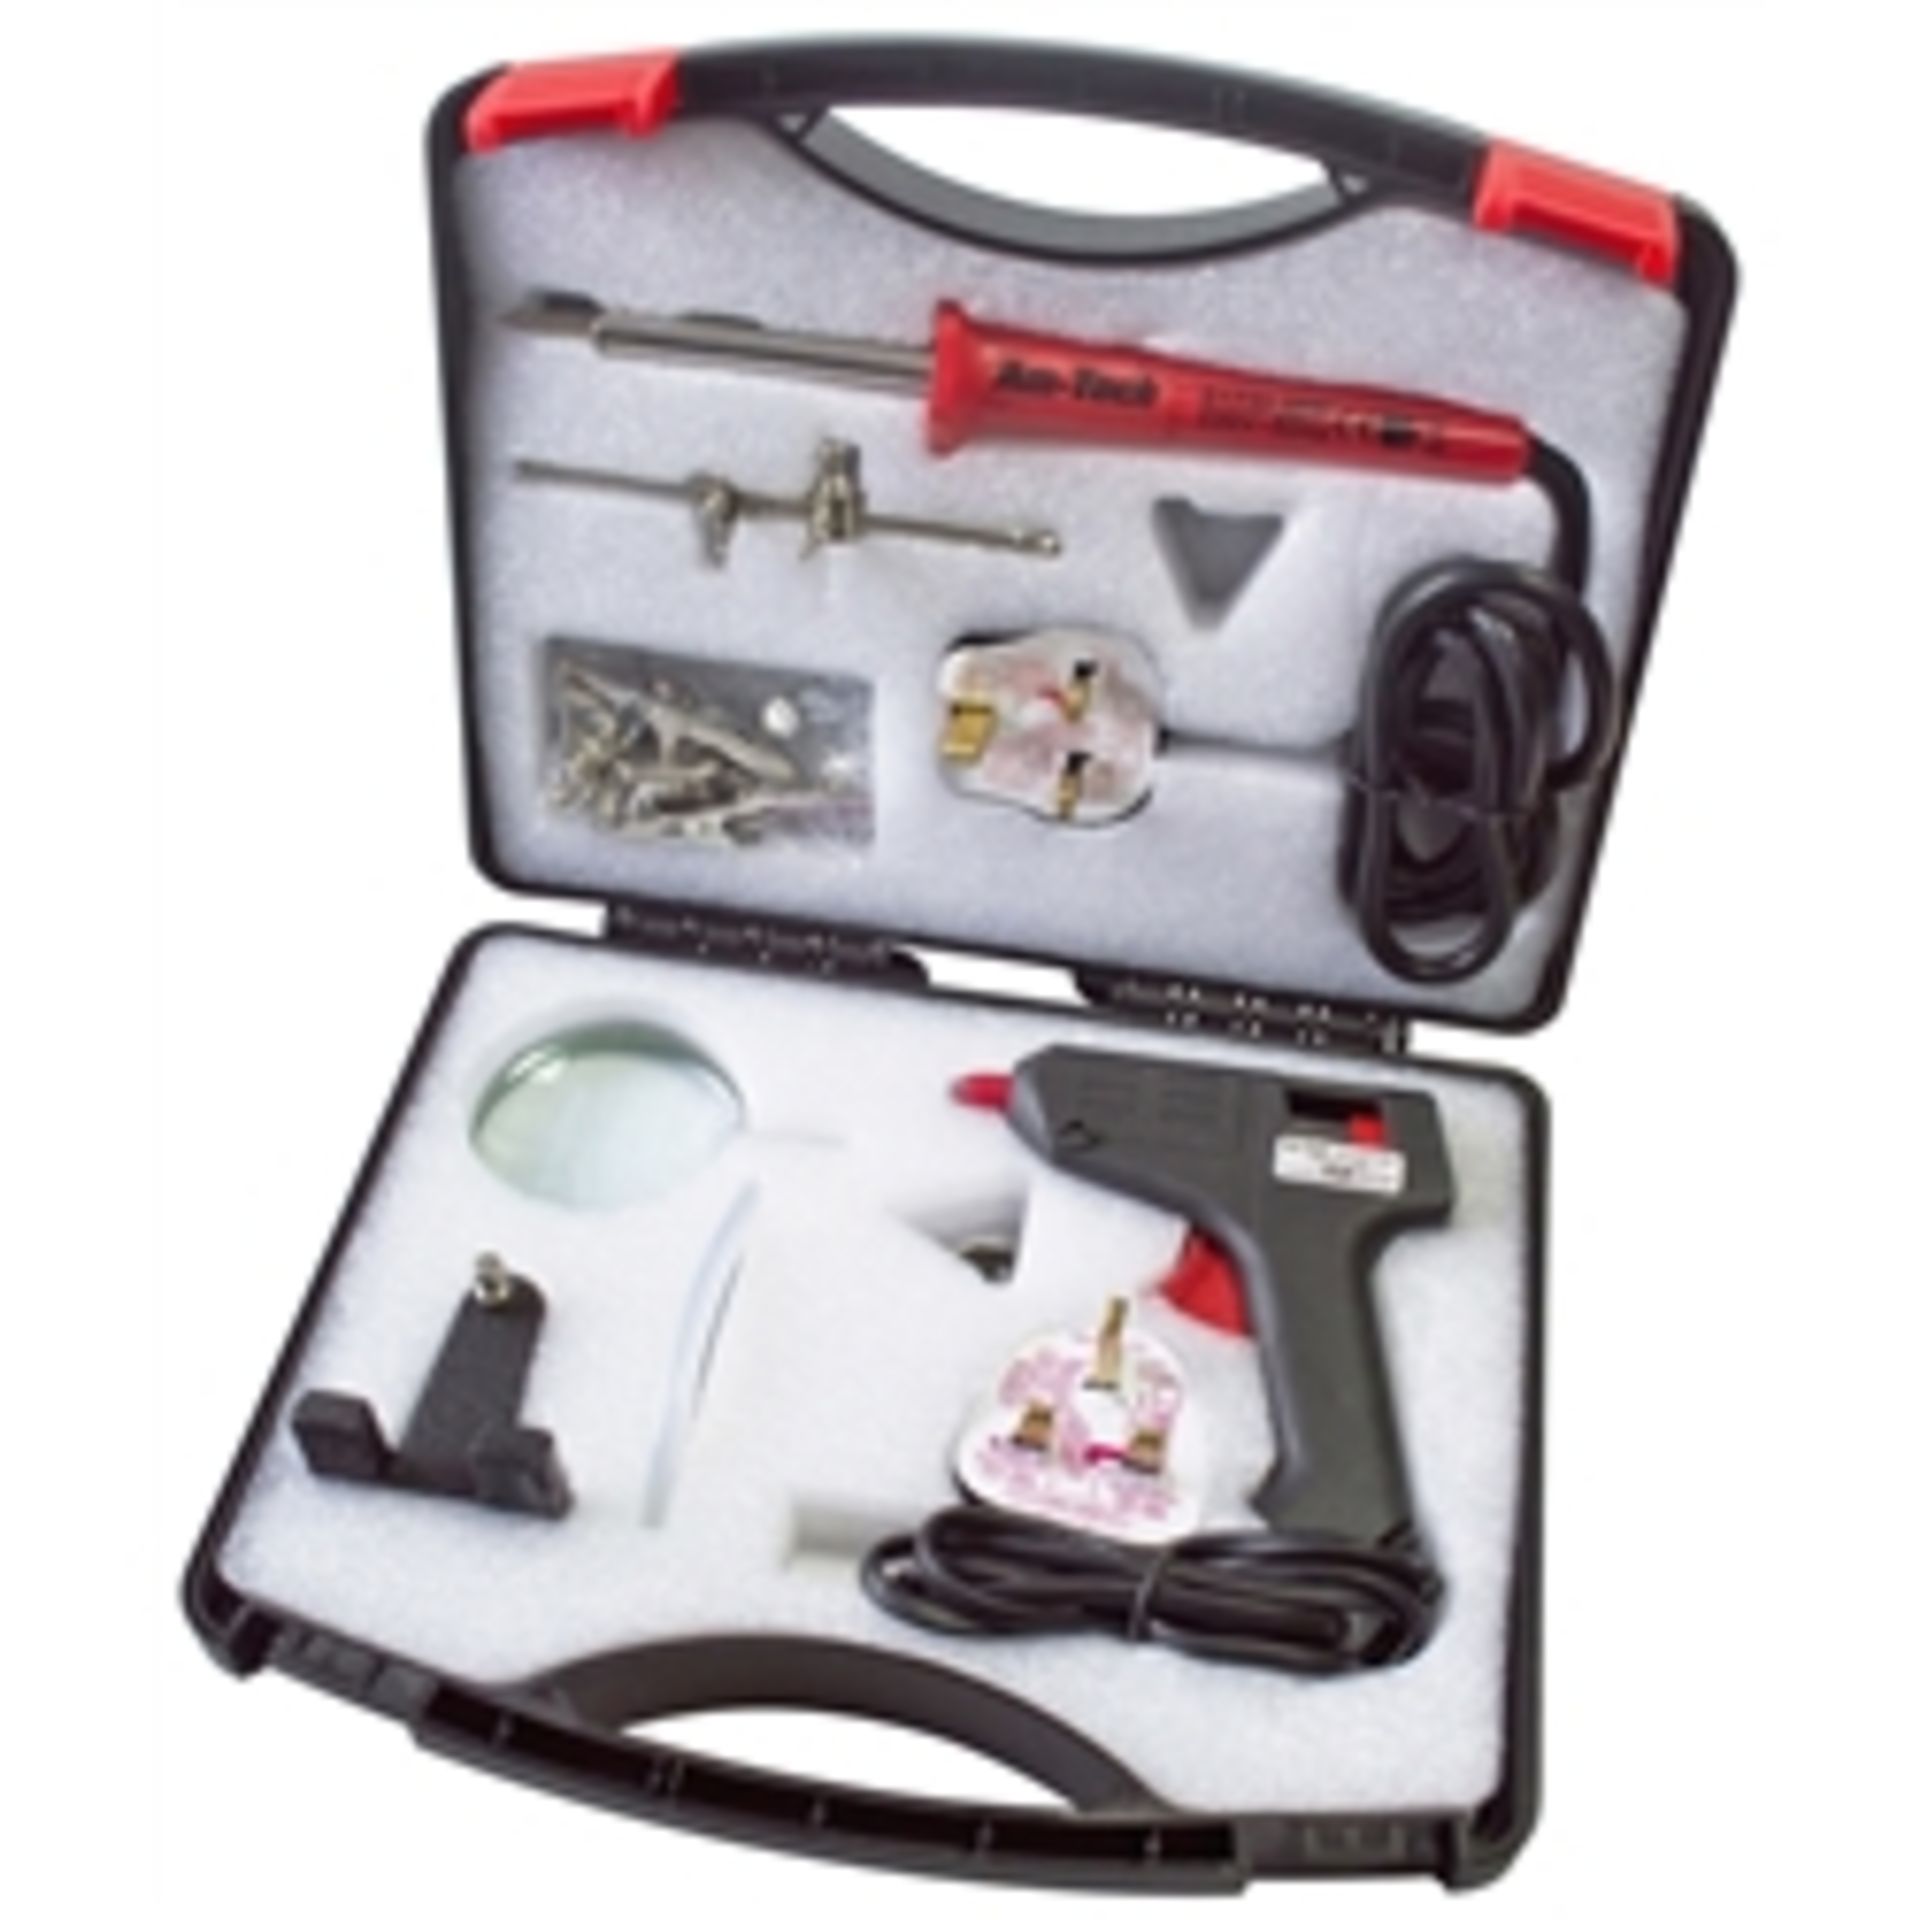 V Brand New Soldering Gun With Accessories In Carry Case X 2 YOUR BID PRICE TO BE MULTIPLIED BY TWO